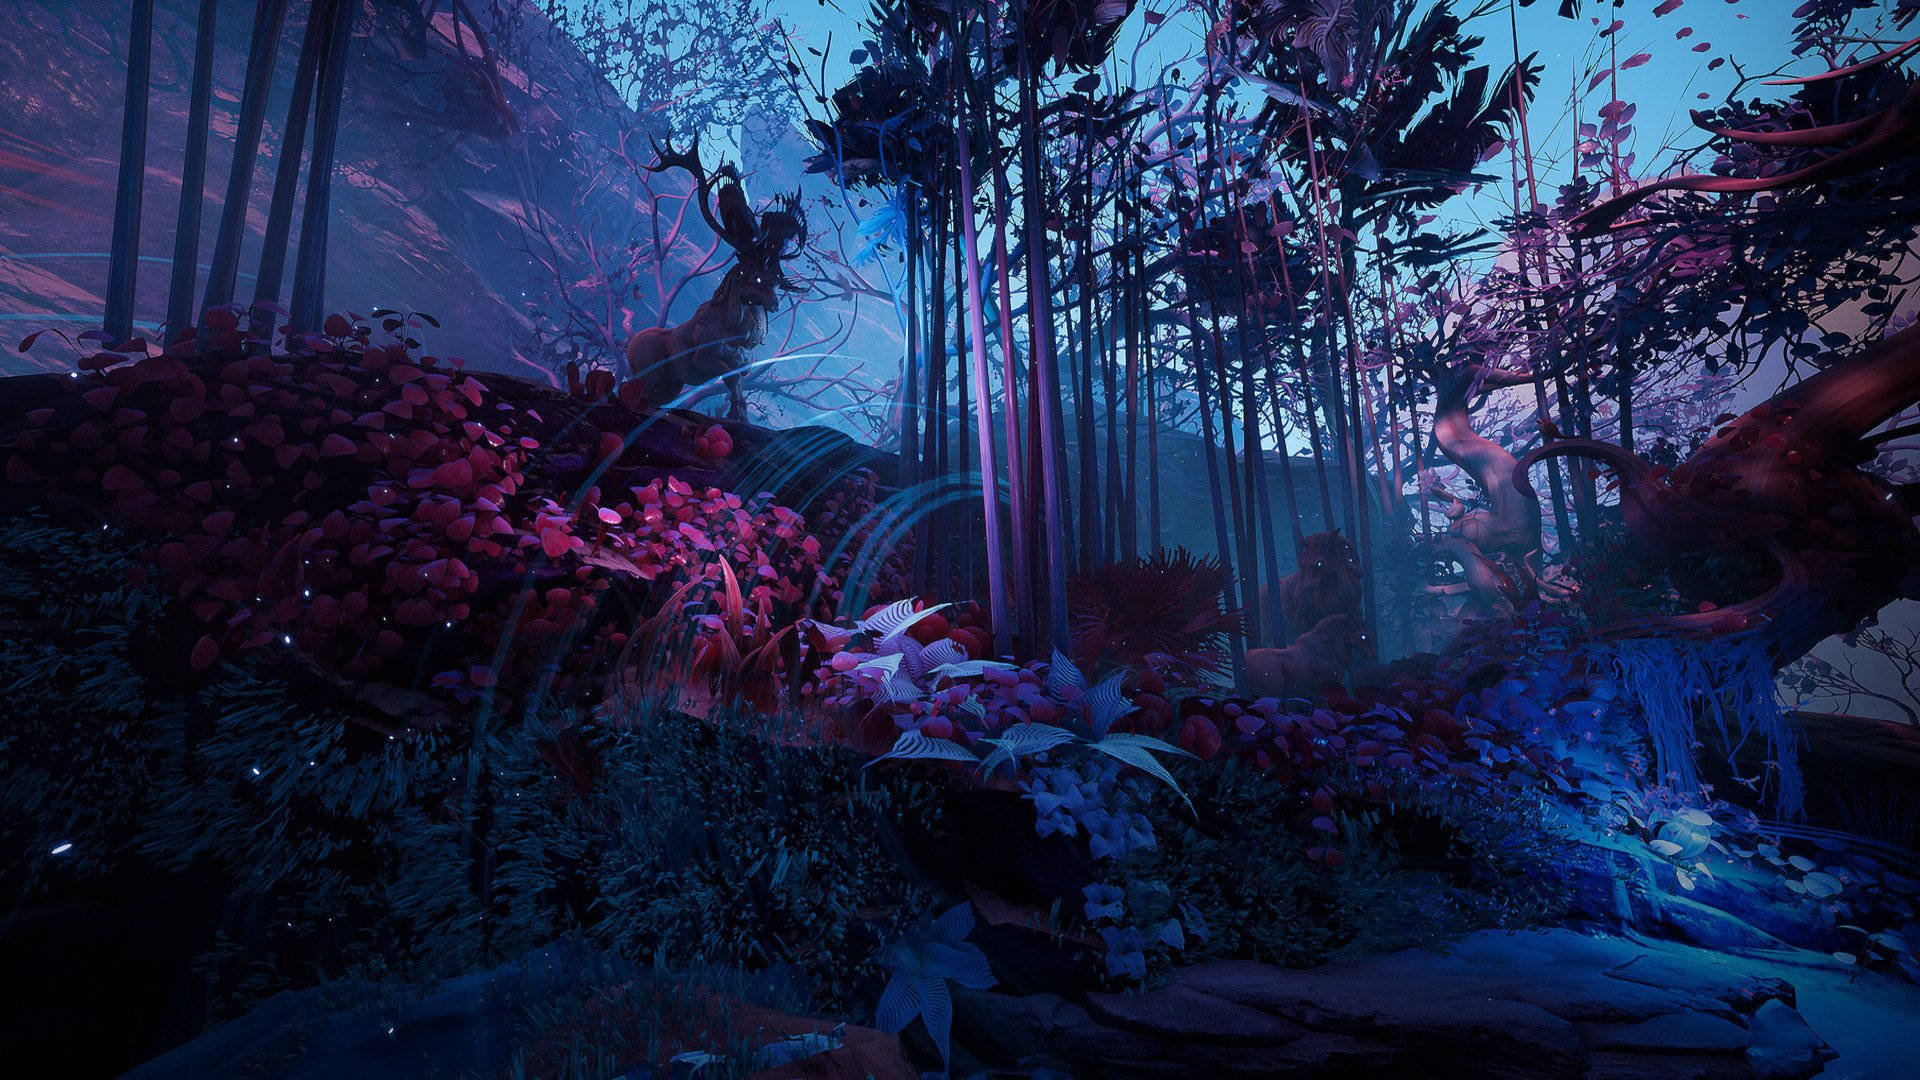 Get lost in the Mystical Forest Wallpaper